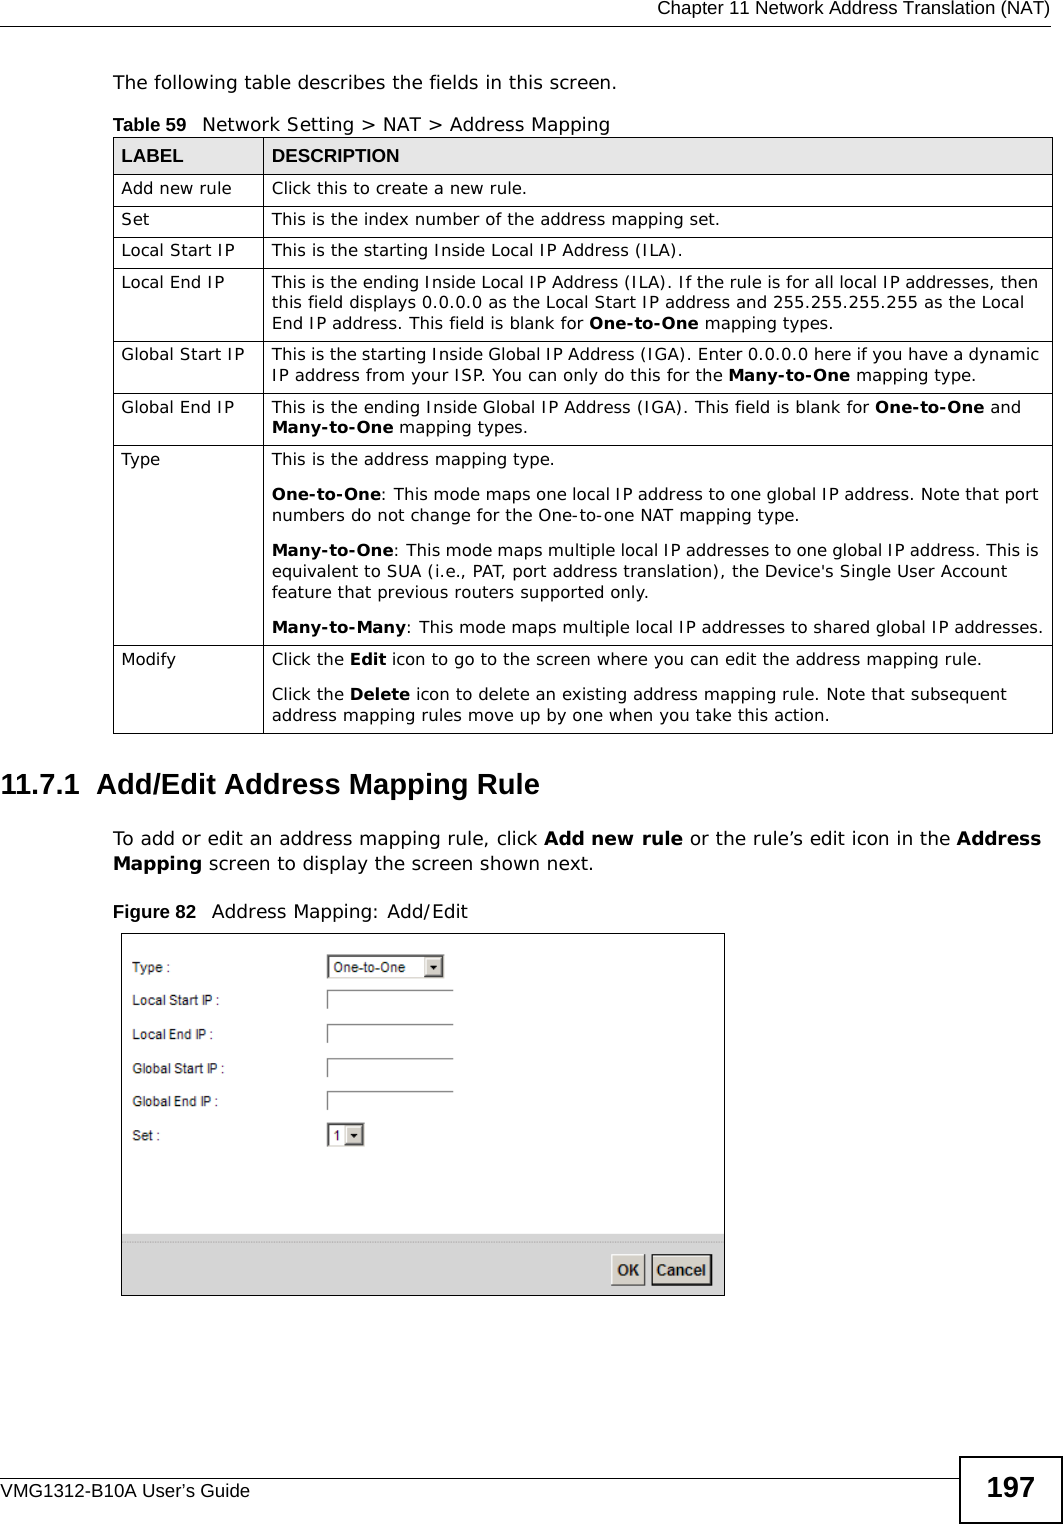  Chapter 11 Network Address Translation (NAT)VMG1312-B10A User’s Guide 197The following table describes the fields in this screen.11.7.1  Add/Edit Address Mapping RuleTo add or edit an address mapping rule, click Add new rule or the rule’s edit icon in the Address Mapping screen to display the screen shown next. Figure 82   Address Mapping: Add/EditTable 59   Network Setting &gt; NAT &gt; Address MappingLABEL DESCRIPTIONAdd new rule Click this to create a new rule.Set This is the index number of the address mapping set.Local Start IP This is the starting Inside Local IP Address (ILA).Local End IP This is the ending Inside Local IP Address (ILA). If the rule is for all local IP addresses, then this field displays 0.0.0.0 as the Local Start IP address and 255.255.255.255 as the Local End IP address. This field is blank for One-to-One mapping types.Global Start IP This is the starting Inside Global IP Address (IGA). Enter 0.0.0.0 here if you have a dynamic IP address from your ISP. You can only do this for the Many-to-One mapping type. Global End IP This is the ending Inside Global IP Address (IGA). This field is blank for One-to-One and Many-to-One mapping types.Type This is the address mapping type.One-to-One: This mode maps one local IP address to one global IP address. Note that port numbers do not change for the One-to-one NAT mapping type.Many-to-One: This mode maps multiple local IP addresses to one global IP address. This is equivalent to SUA (i.e., PAT, port address translation), the Device&apos;s Single User Account feature that previous routers supported only. Many-to-Many: This mode maps multiple local IP addresses to shared global IP addresses.Modify Click the Edit icon to go to the screen where you can edit the address mapping rule.Click the Delete icon to delete an existing address mapping rule. Note that subsequent address mapping rules move up by one when you take this action.